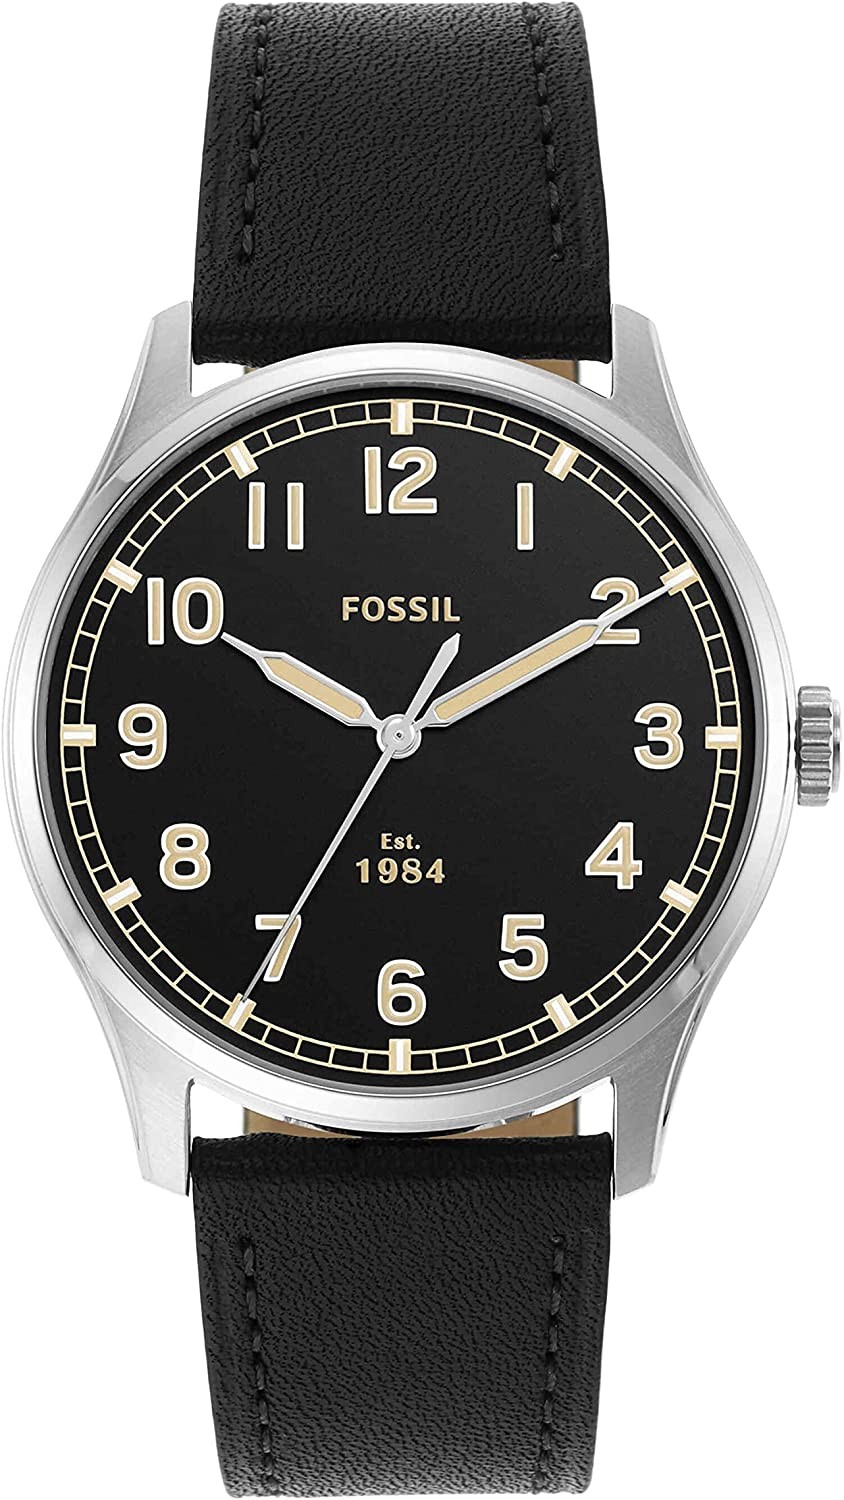 Fossil Men's Dayliner Stainless Steel and Leather Slim Minimalist ...